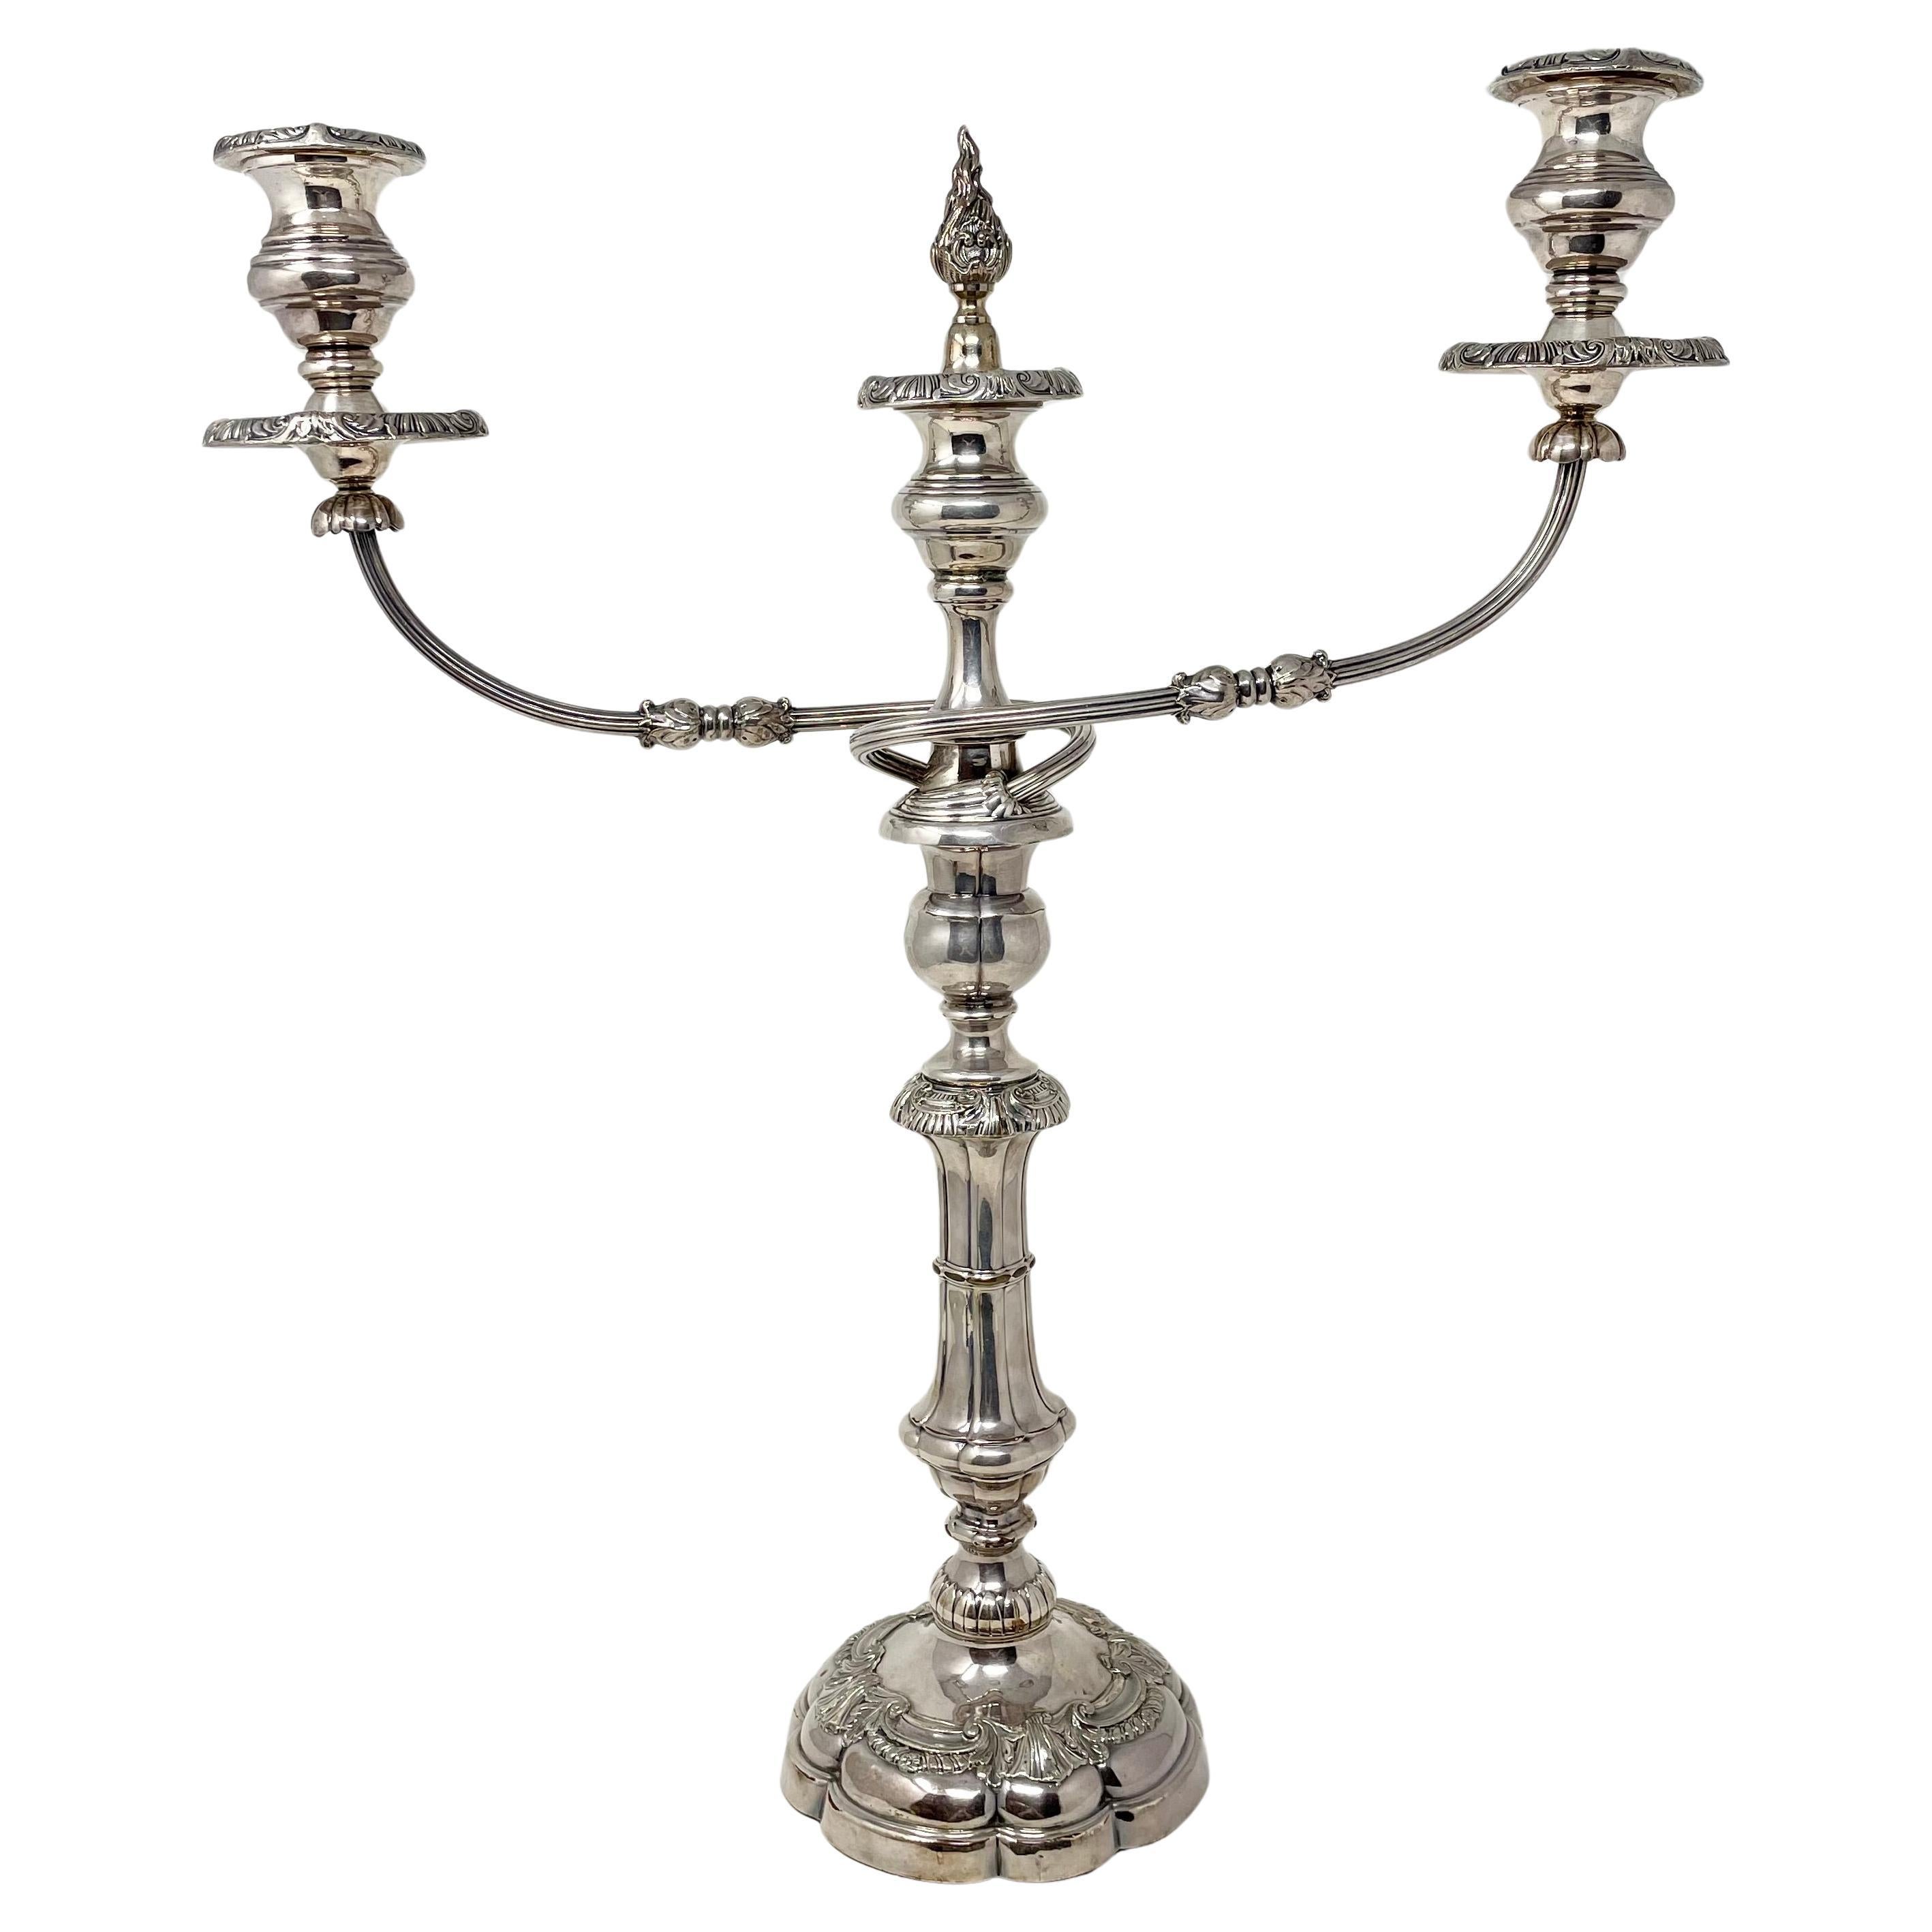 Pair antique English Sheffield silver-plated convertible candelabra, circa 1870.
Per the last 3 photos, these pieces convert from triple cup candelabra to single cup candlesticks.